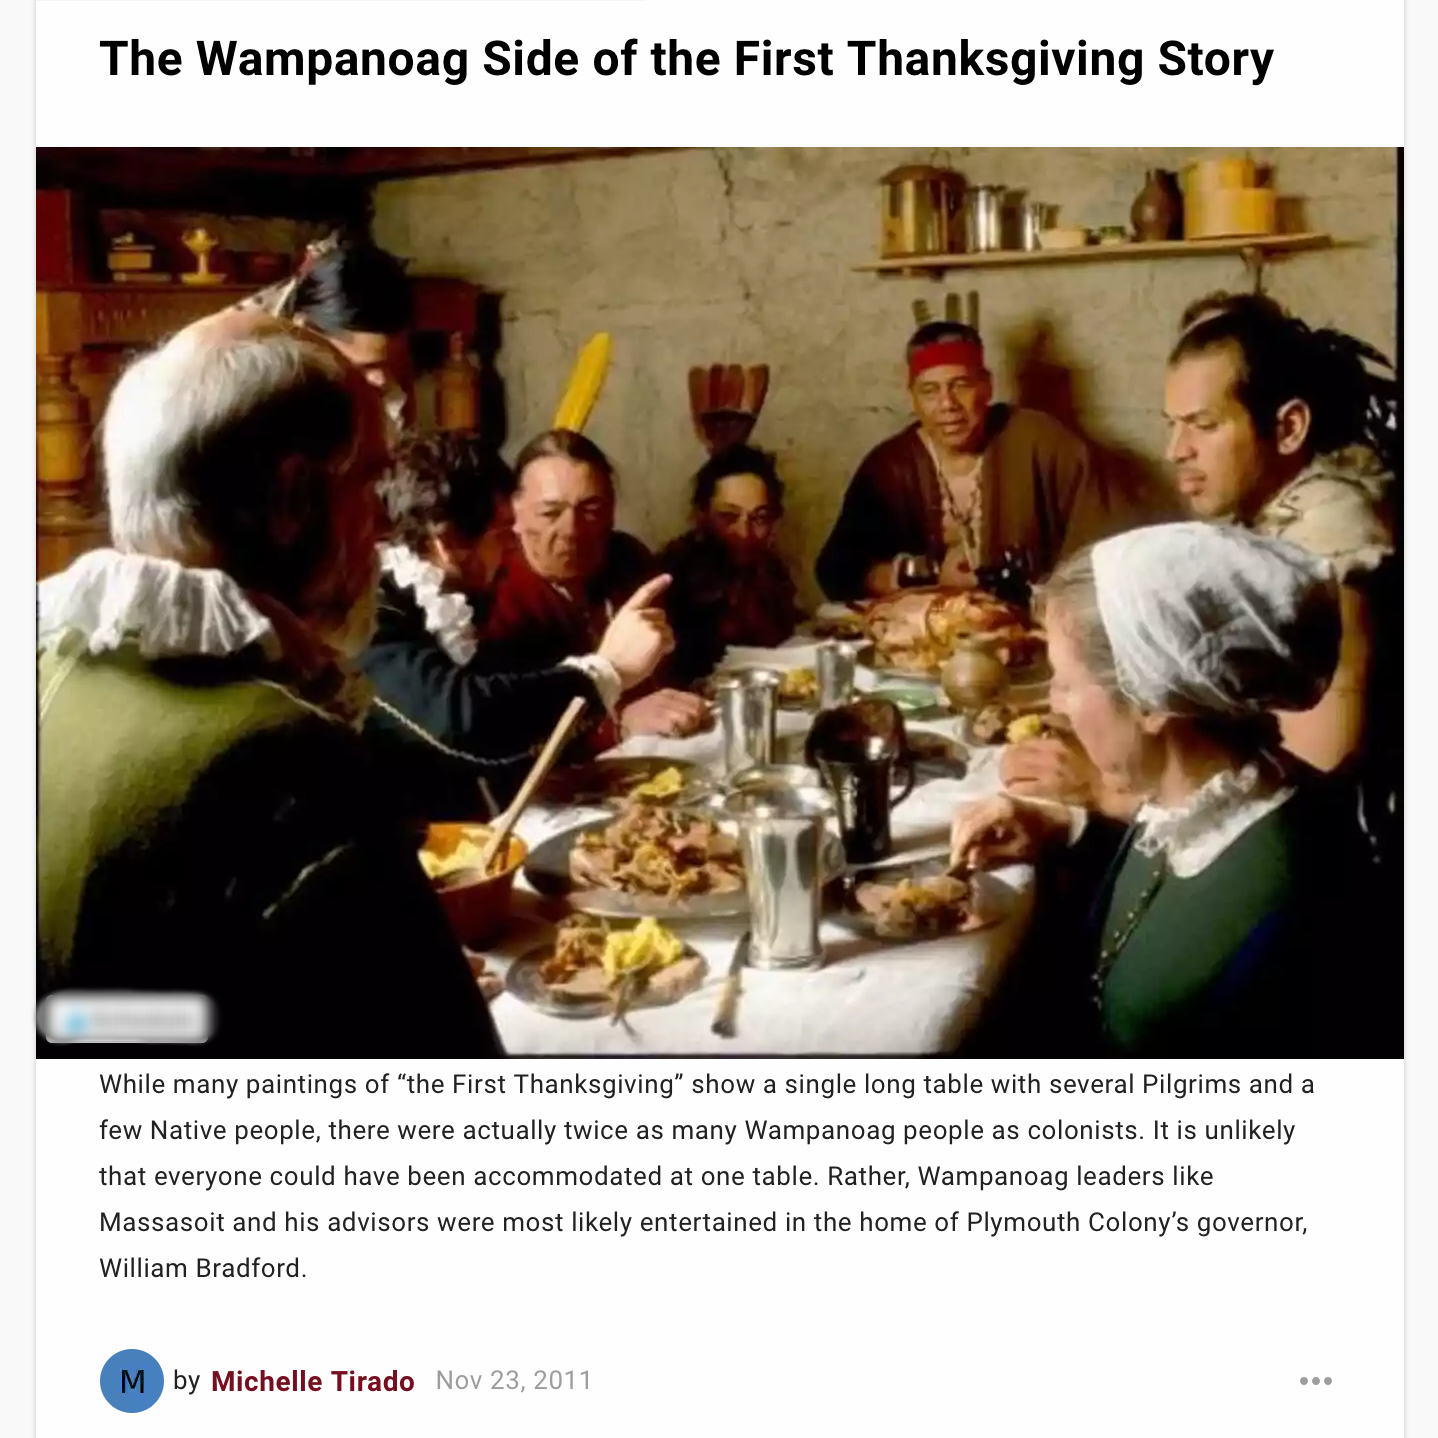  The first Thanksgiving from the perspective of the Wampanoag people.  